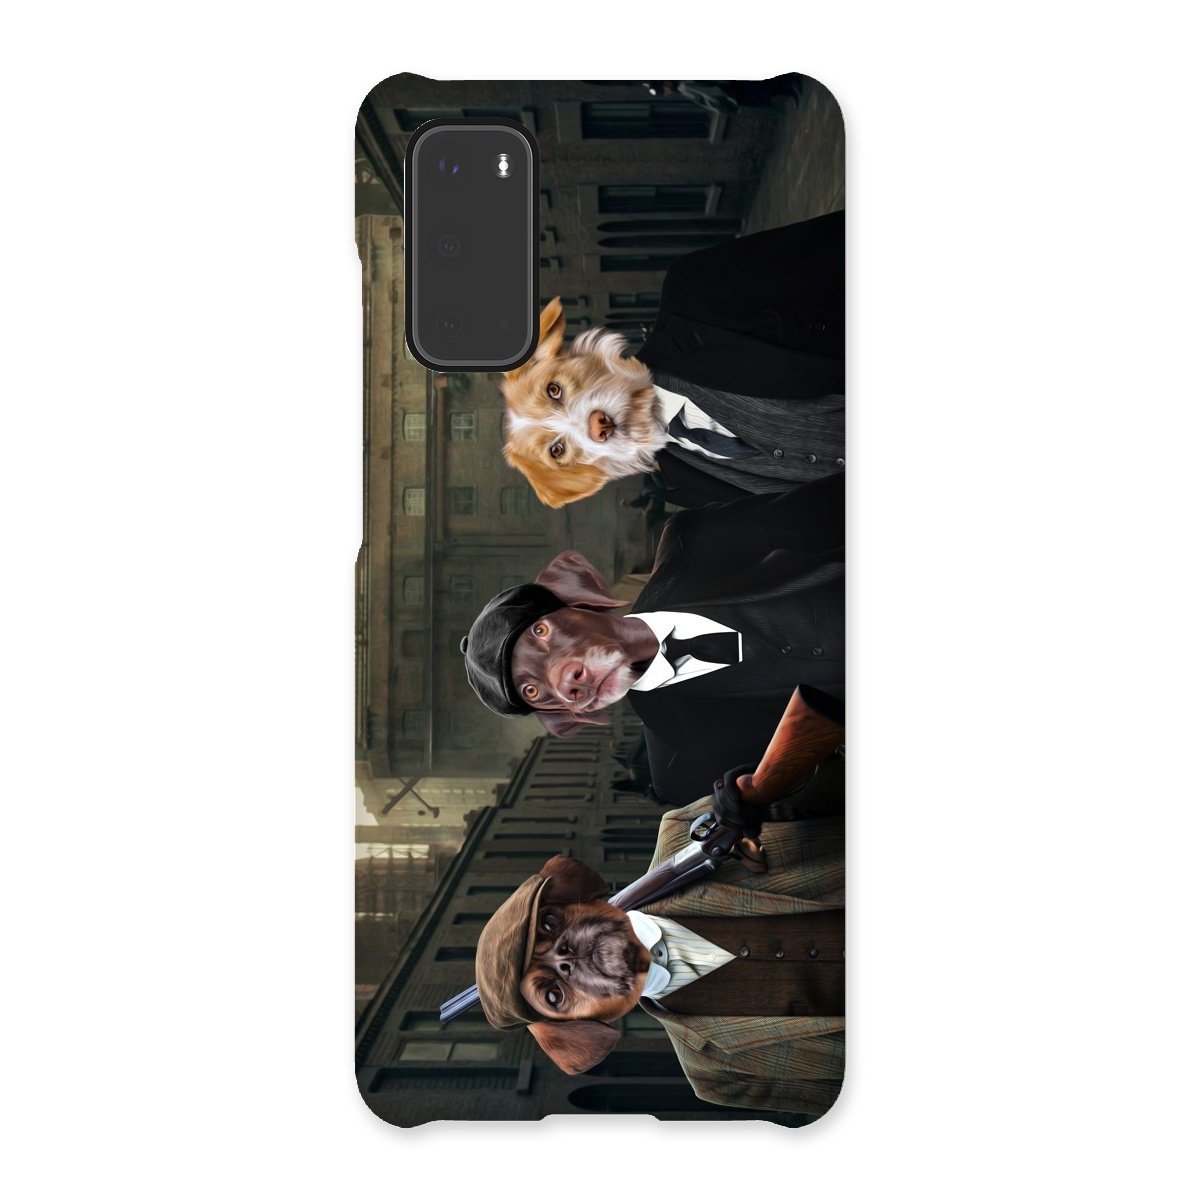 The 3 Brothers (Peaky Blinders Inspired): Custom Pet Phone Case - Paw & Glory - paw and glory, personalised puppy phone case, personalised cat phone case, pet portrait phone case uk, pet phone case, puppy phone case, personalised pet phone case, Pet Portrait phone case,